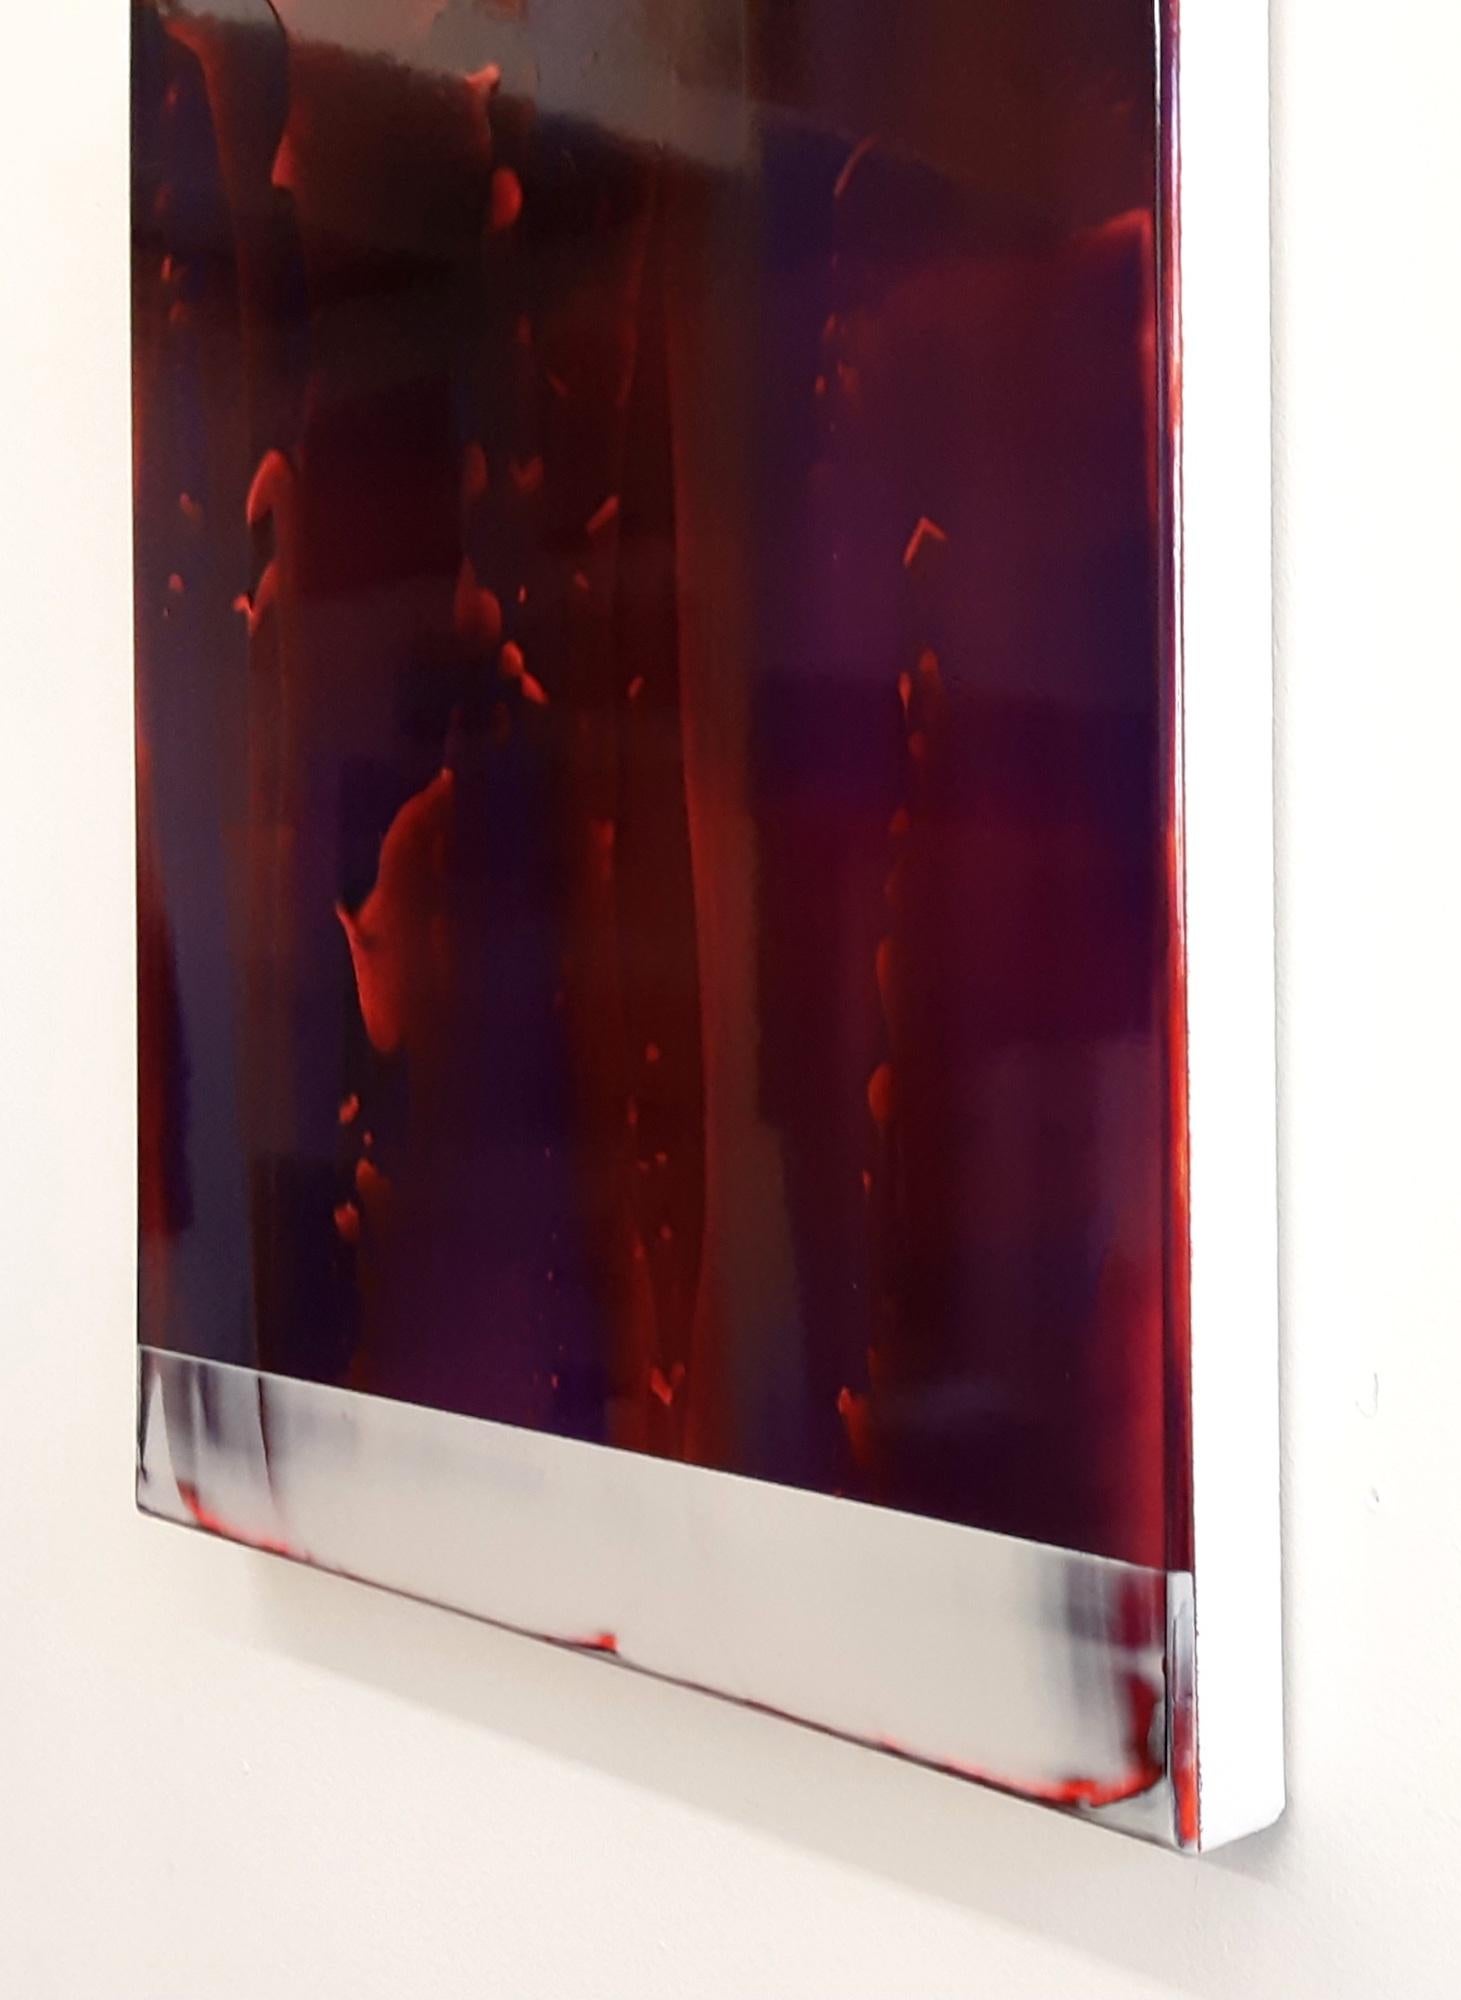 Echoes (2/19) by James Lumsden - Abstract colour painting, violet & bright red For Sale 6